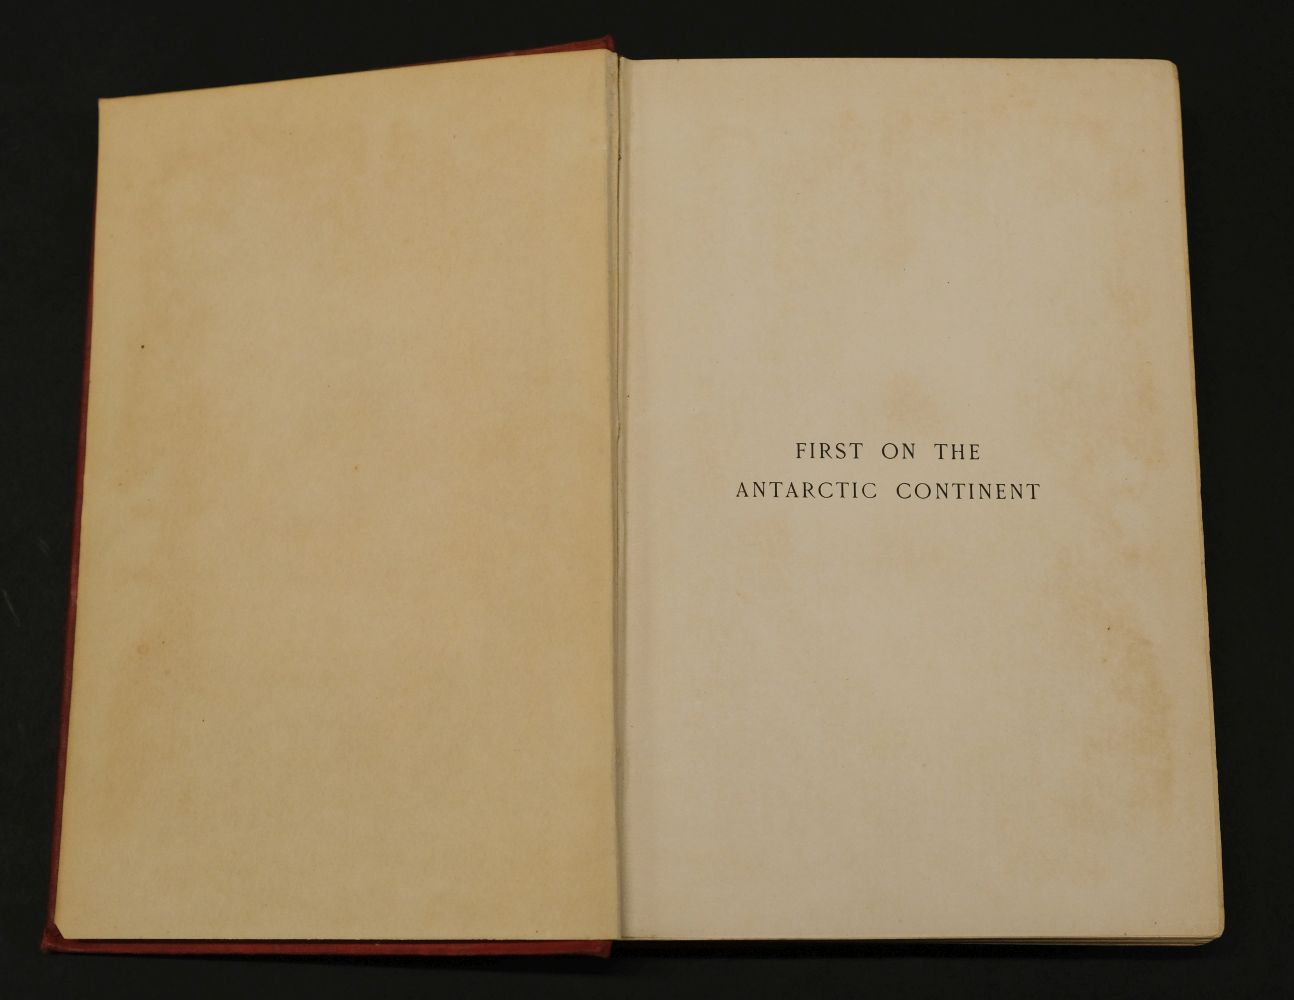 Borchgrevink (Carsten). First on the Antarctic Continent, 1st edition, London: George Newnes, 1901 - Image 7 of 14